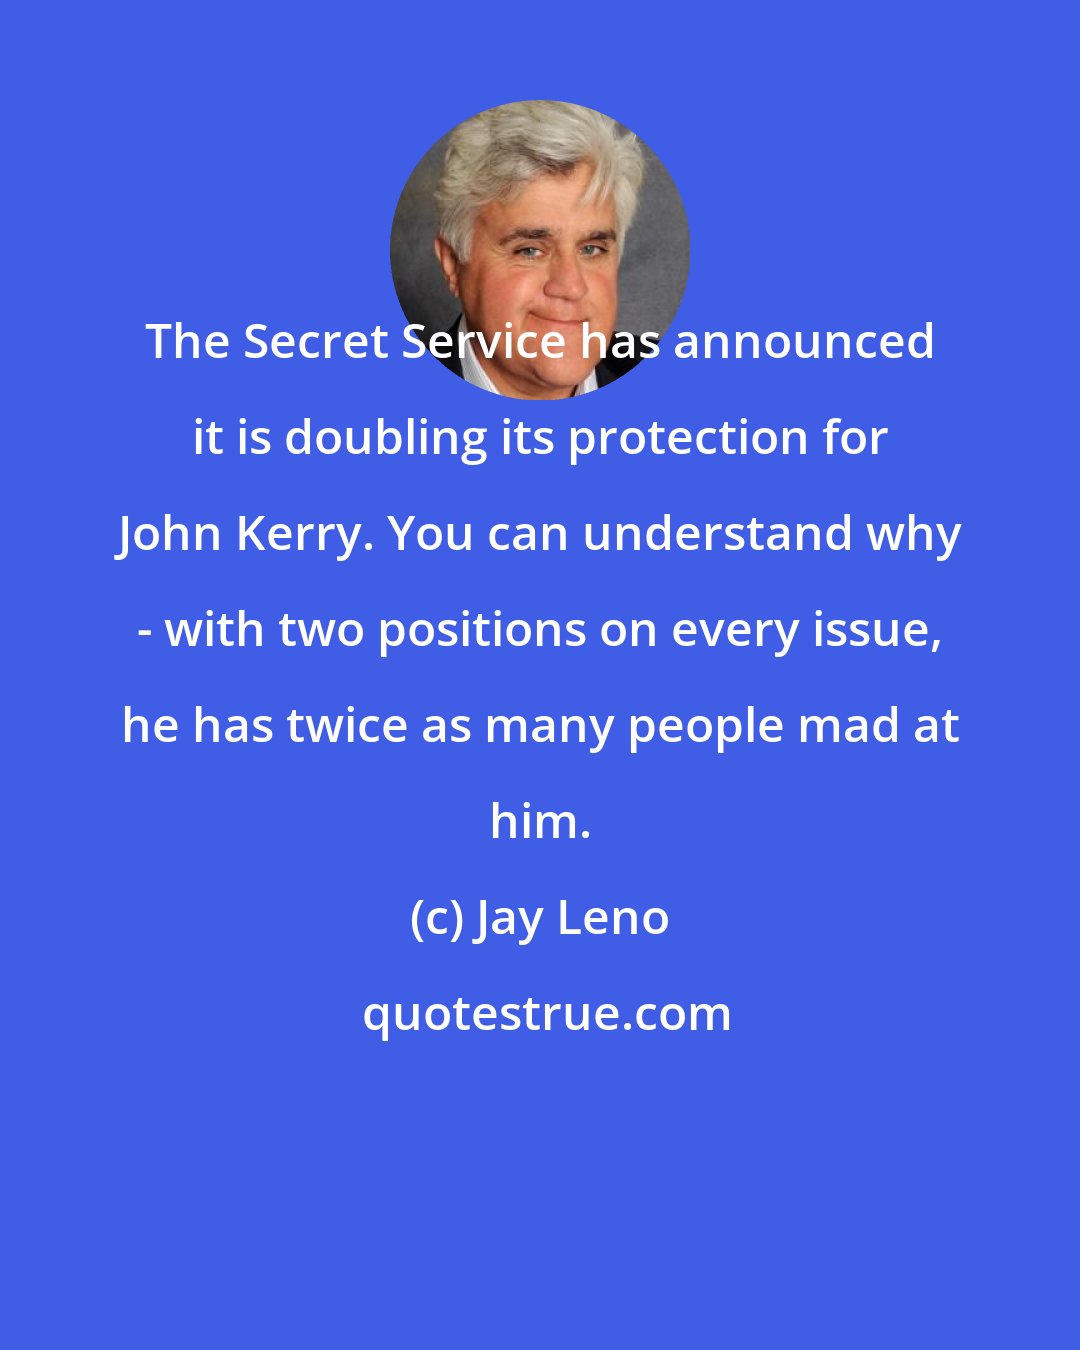 Jay Leno: The Secret Service has announced it is doubling its protection for John Kerry. You can understand why - with two positions on every issue, he has twice as many people mad at him.